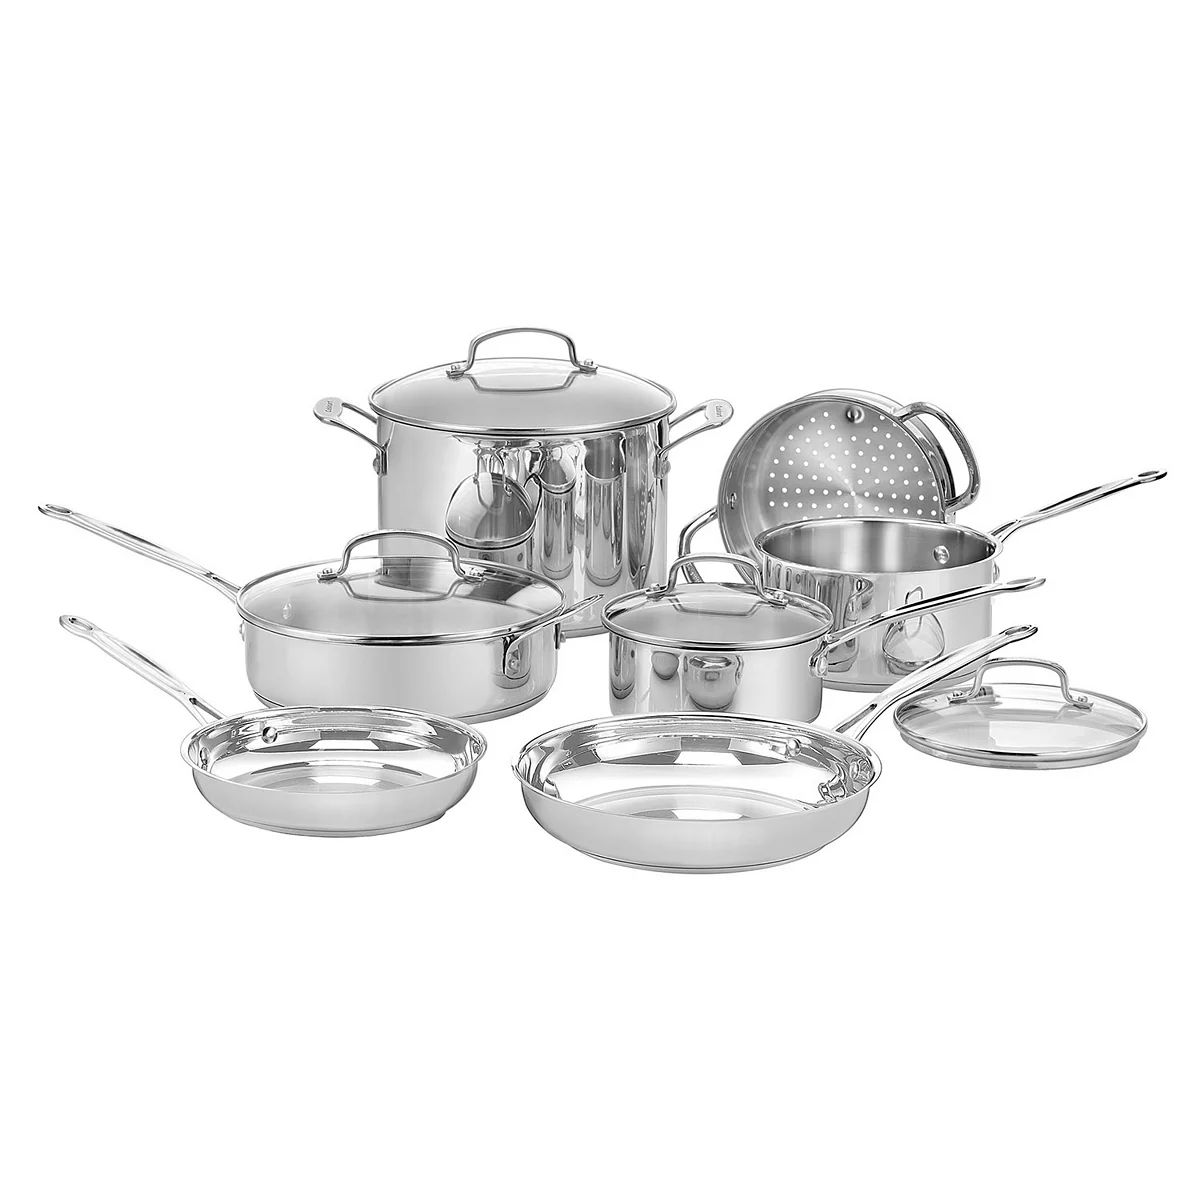 Cuisinart Chef's Classic 11-pc. Stainless Steel Cookware Set | Kohl's